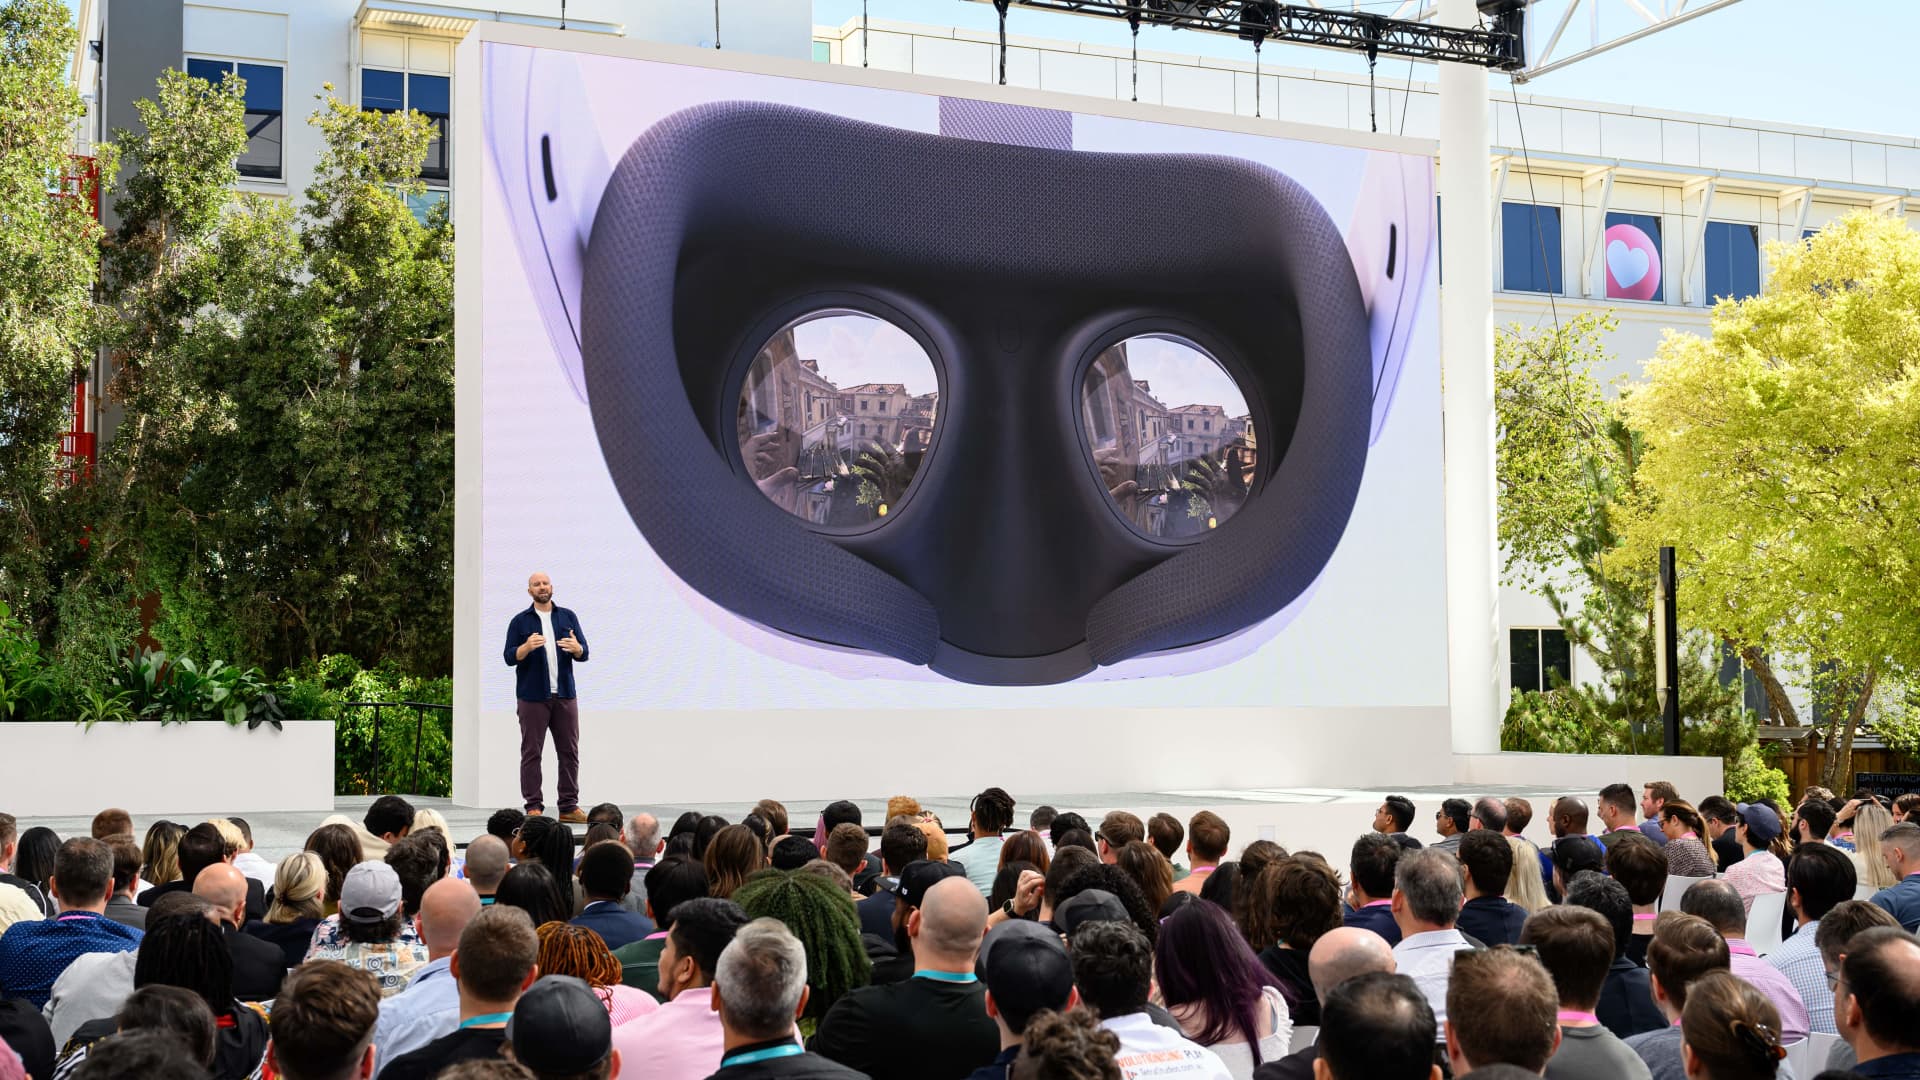 Meta has Apple to thank for giving its annual VR conference added sizzle this year